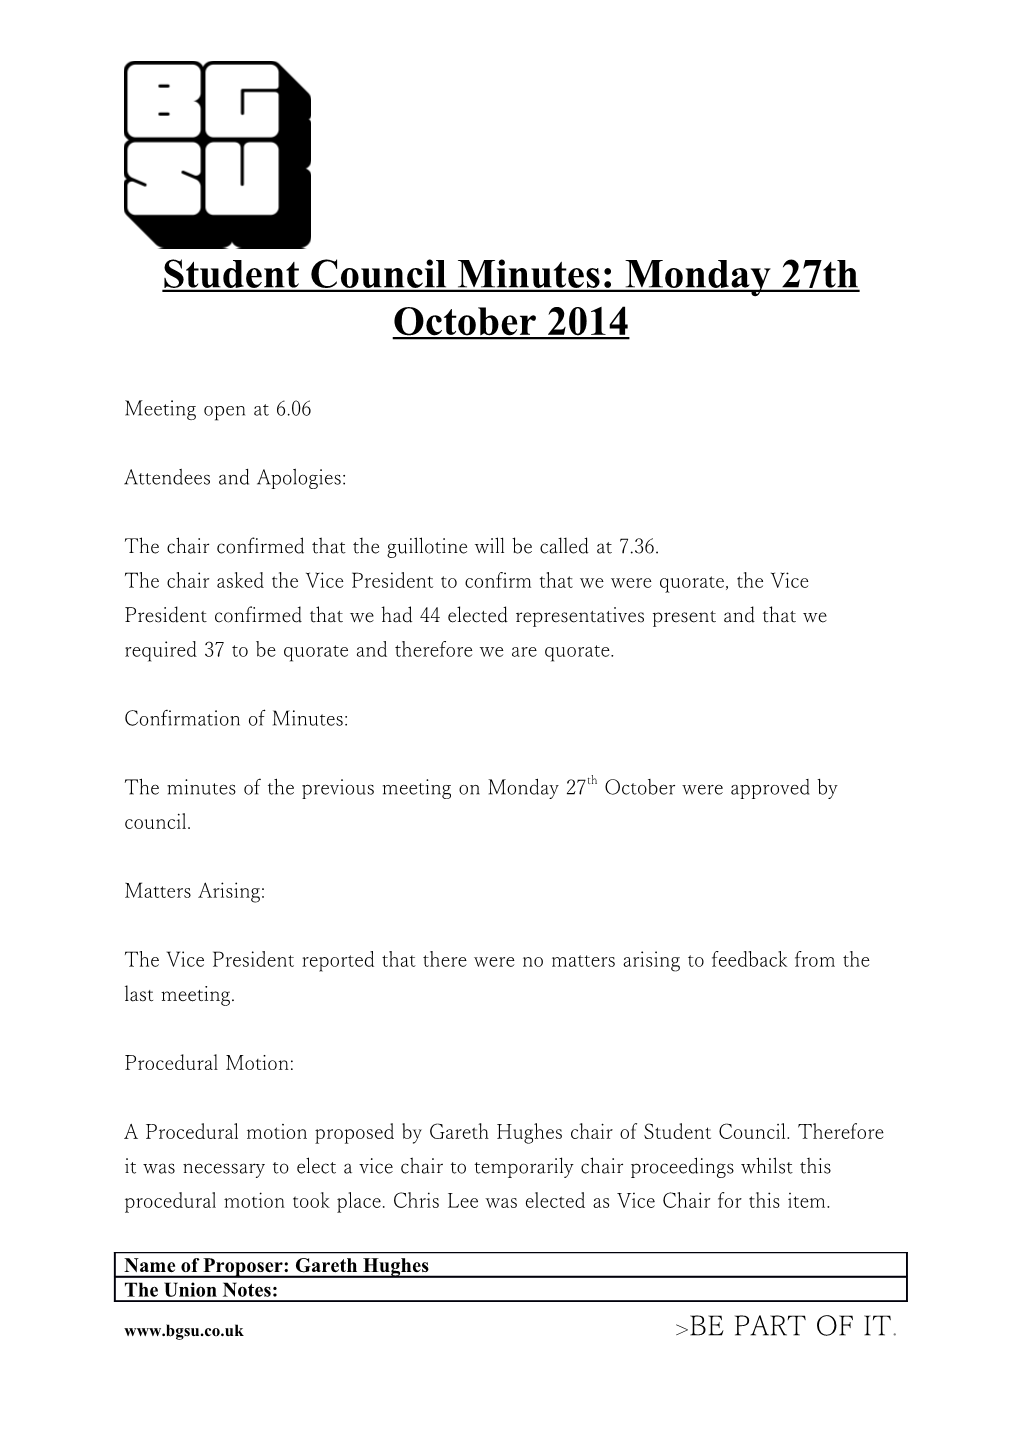 Student Council Minutes: Monday 27Th October 2014